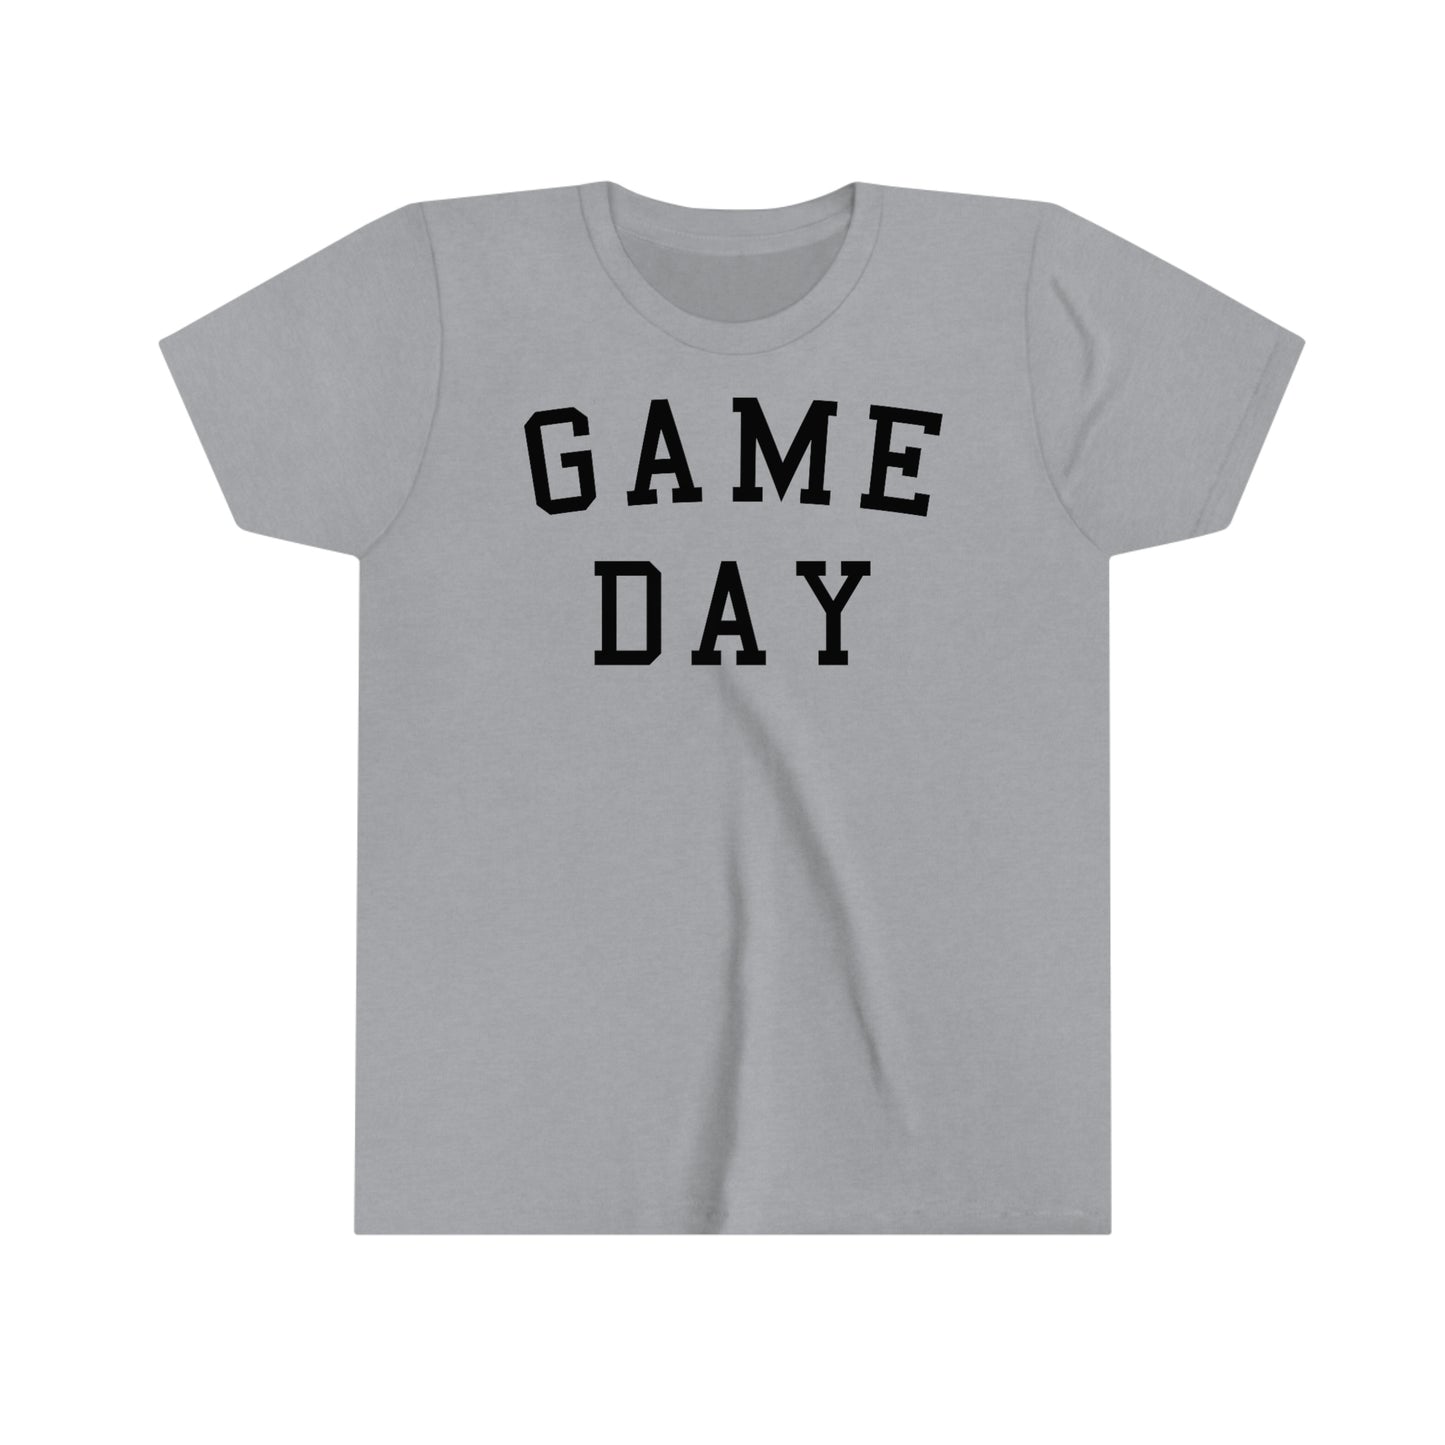 Game Day Youth Tee